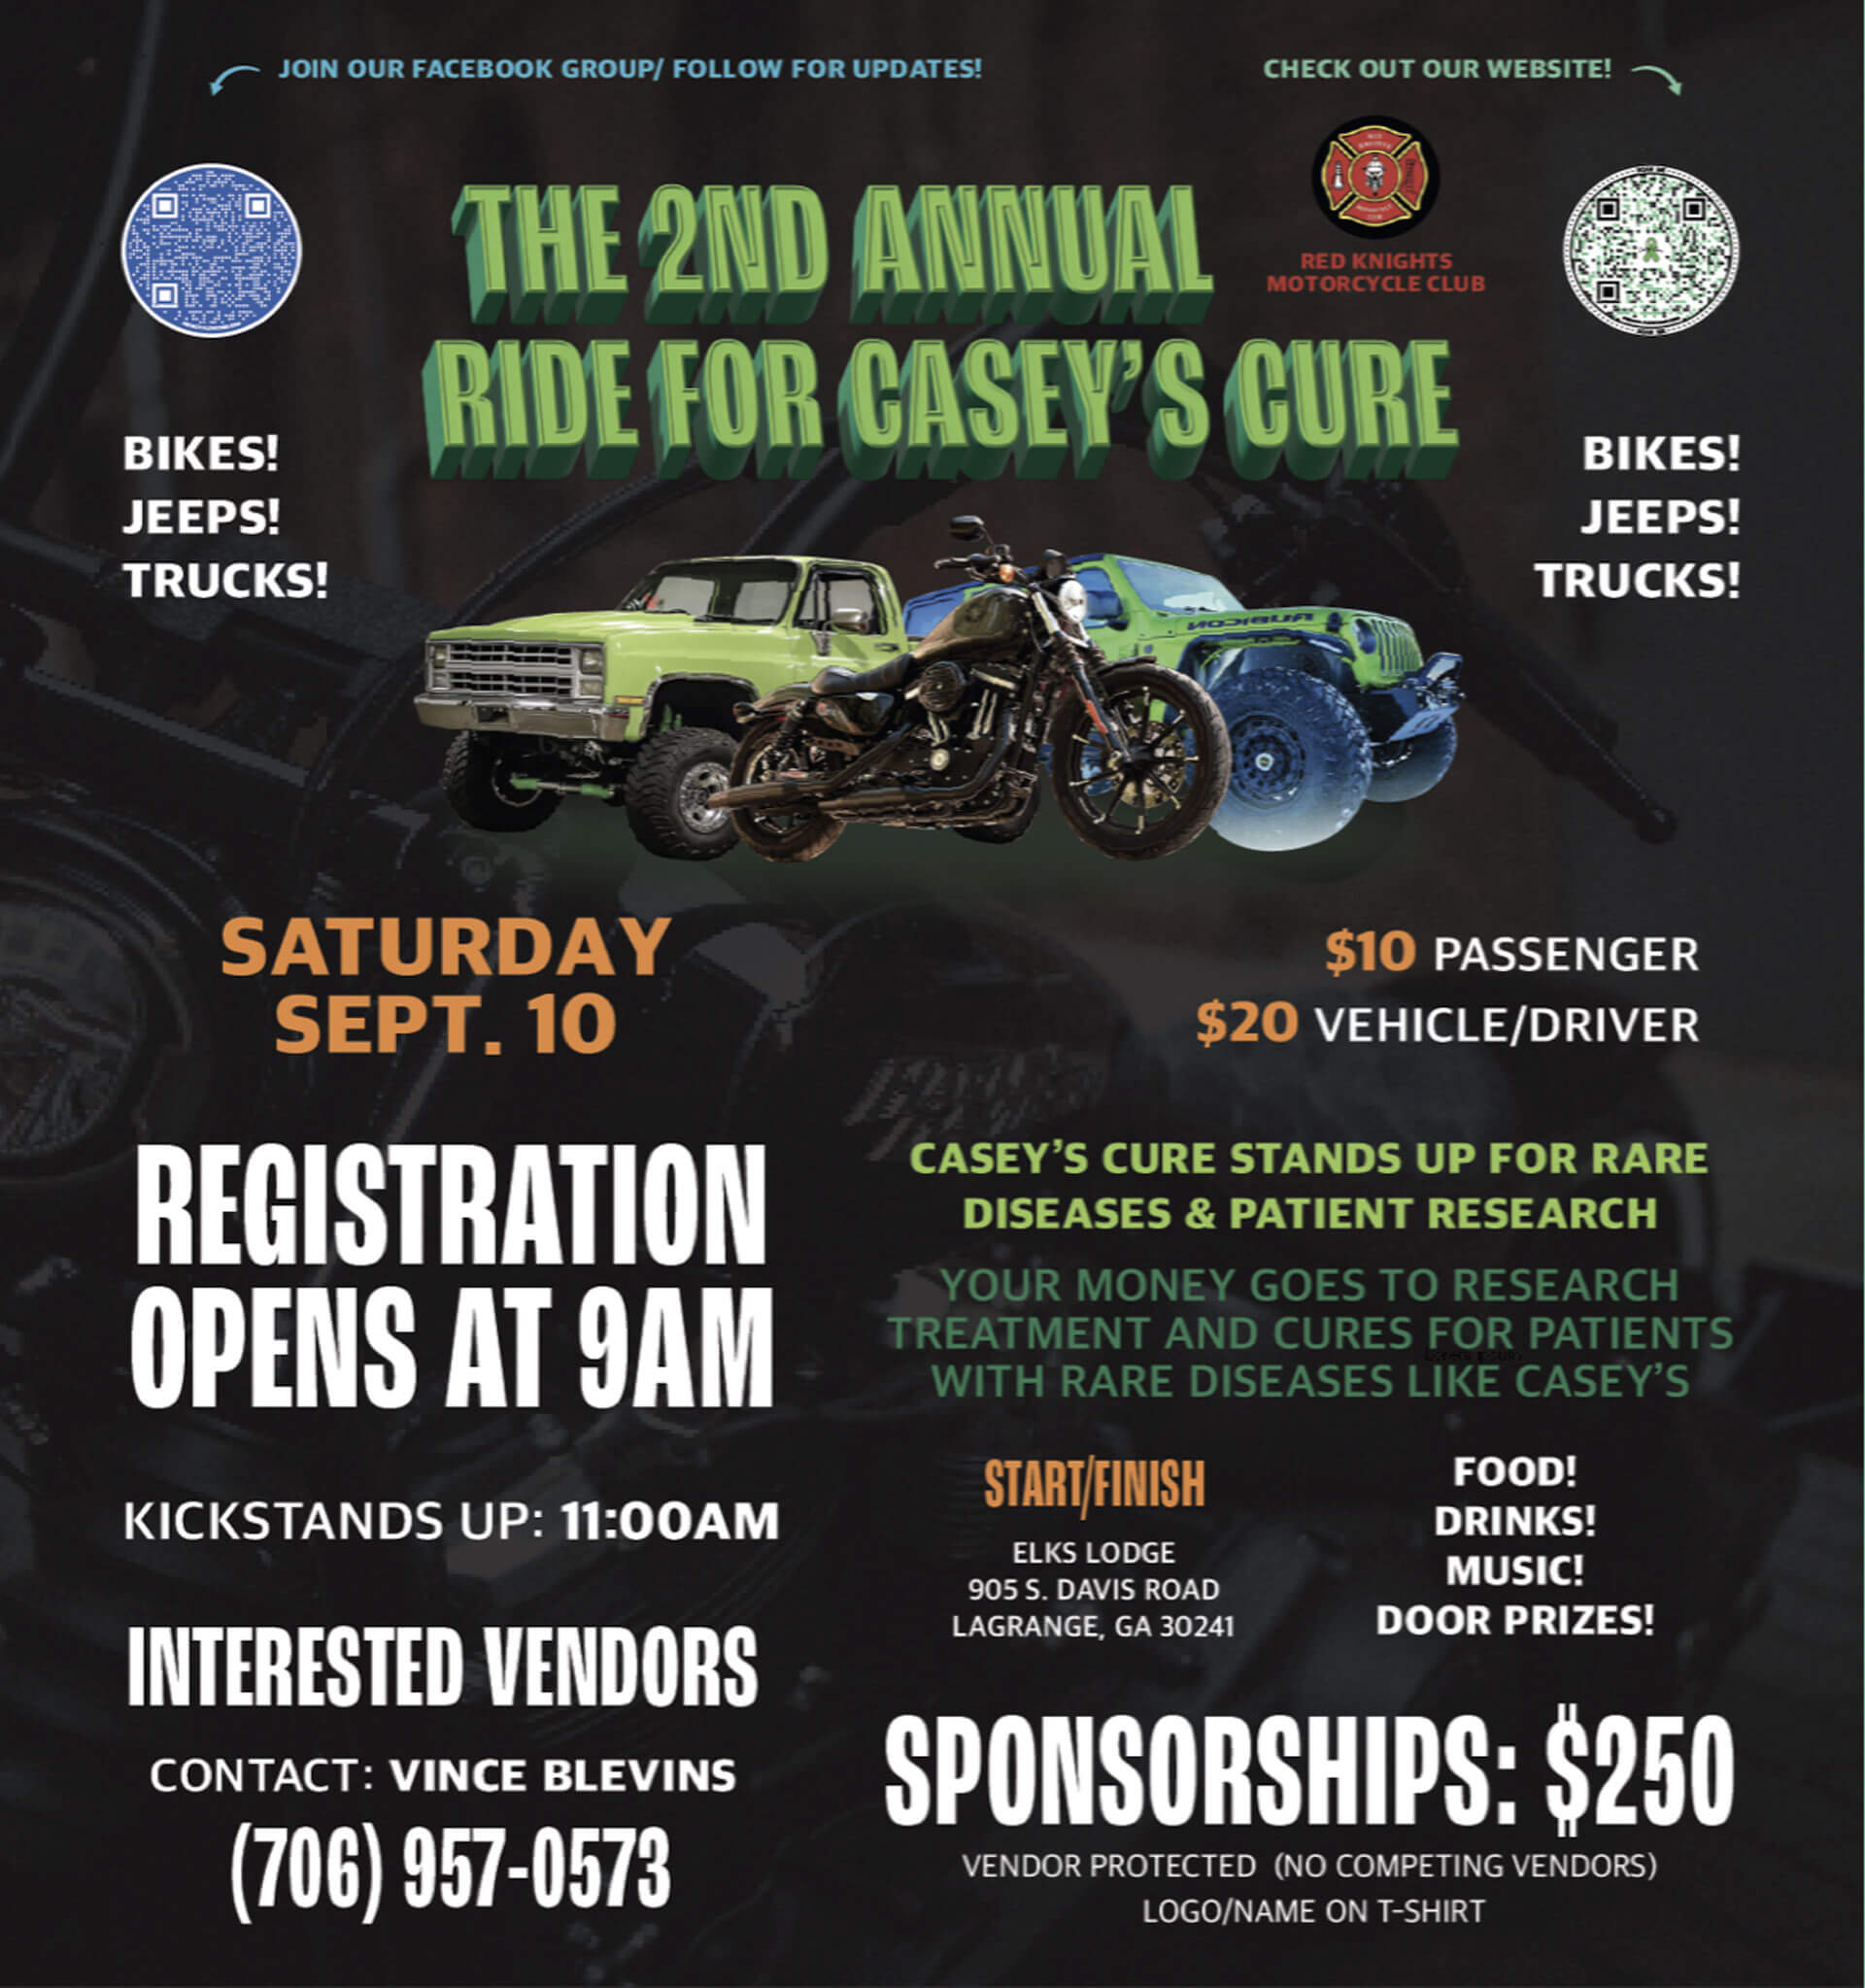 The 2nd Annual Ride for Casey's Cure